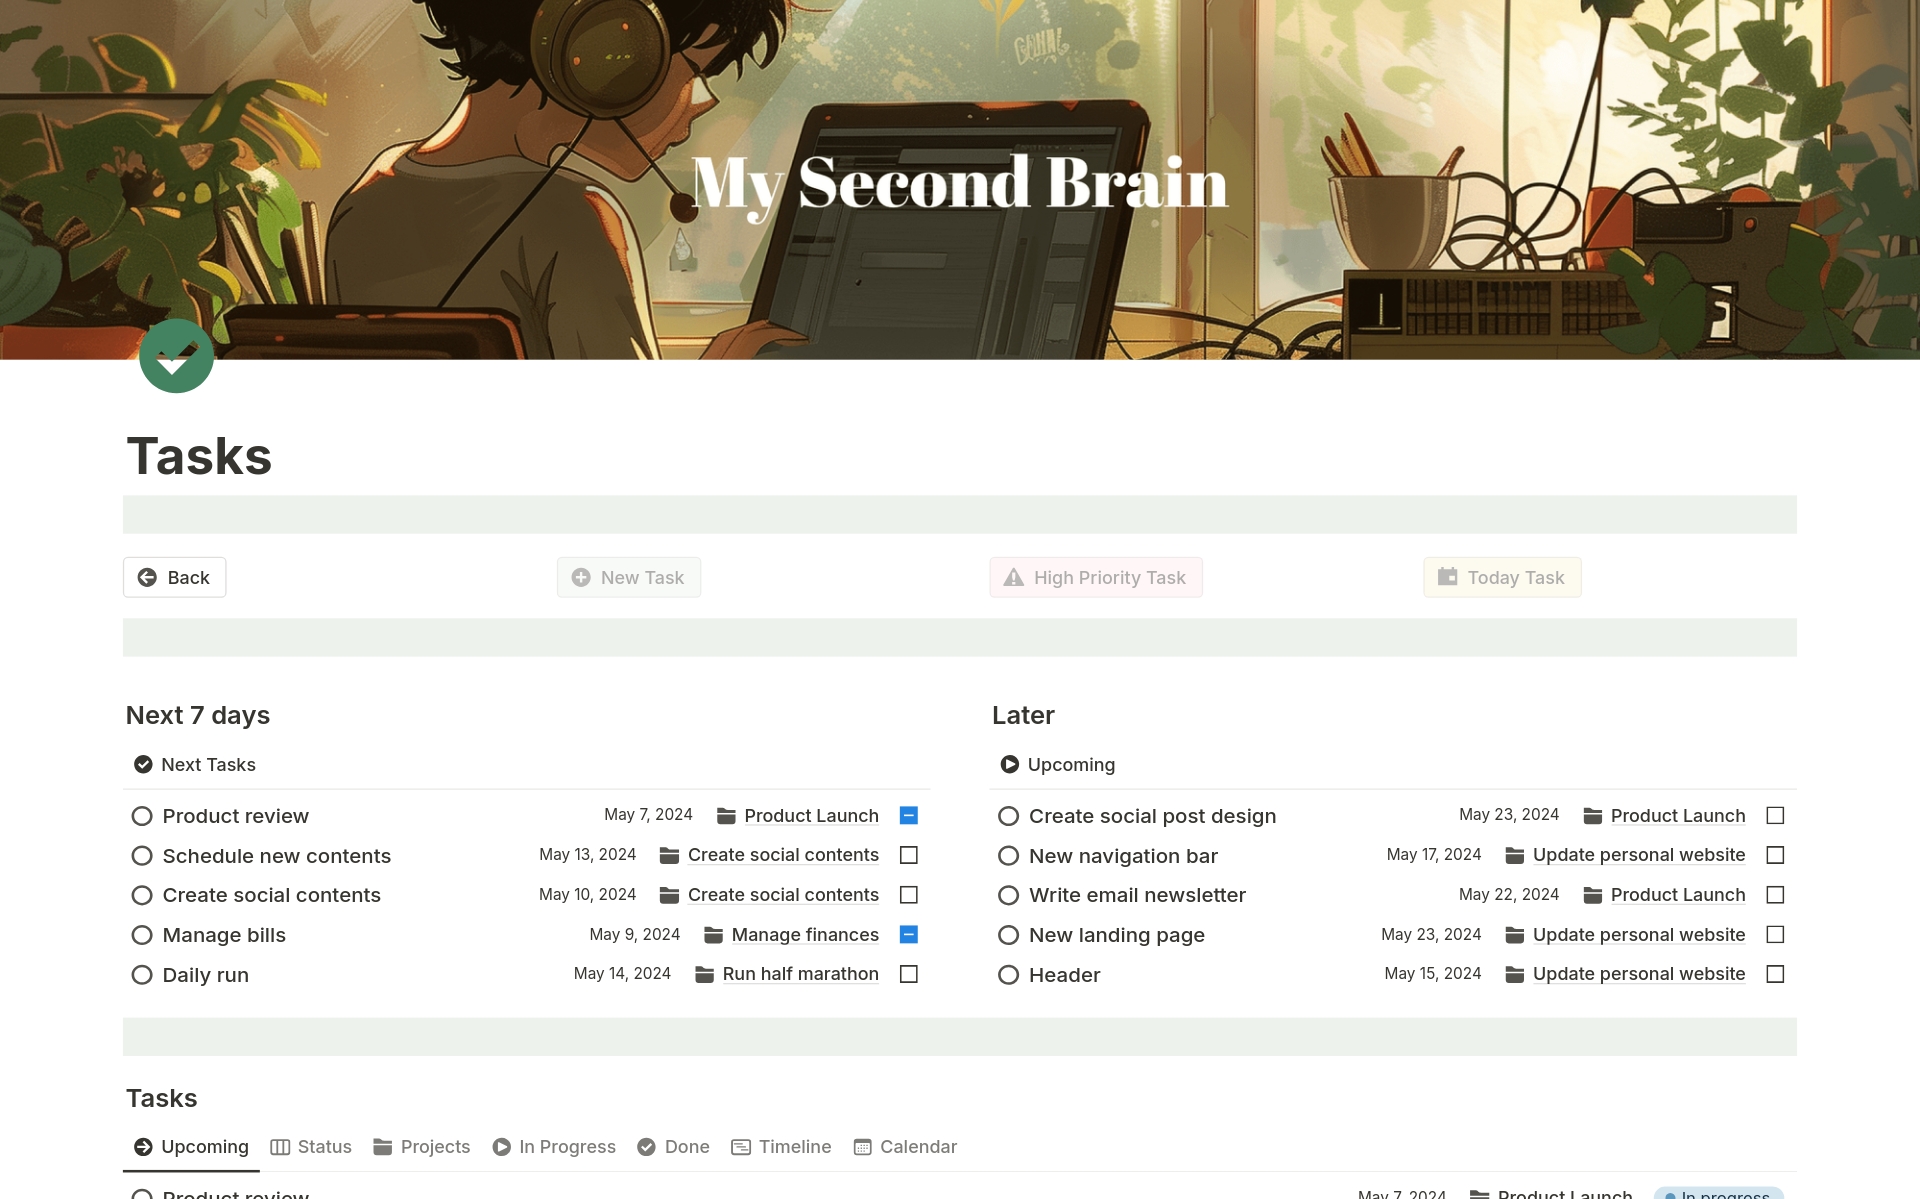 Start organizing and planning your life with this super aesthetic lo-fi Second Brain system. Manage your life using the PARA method (Projects > Areas > Resources > Archives) all in one place within your Notion workspace.